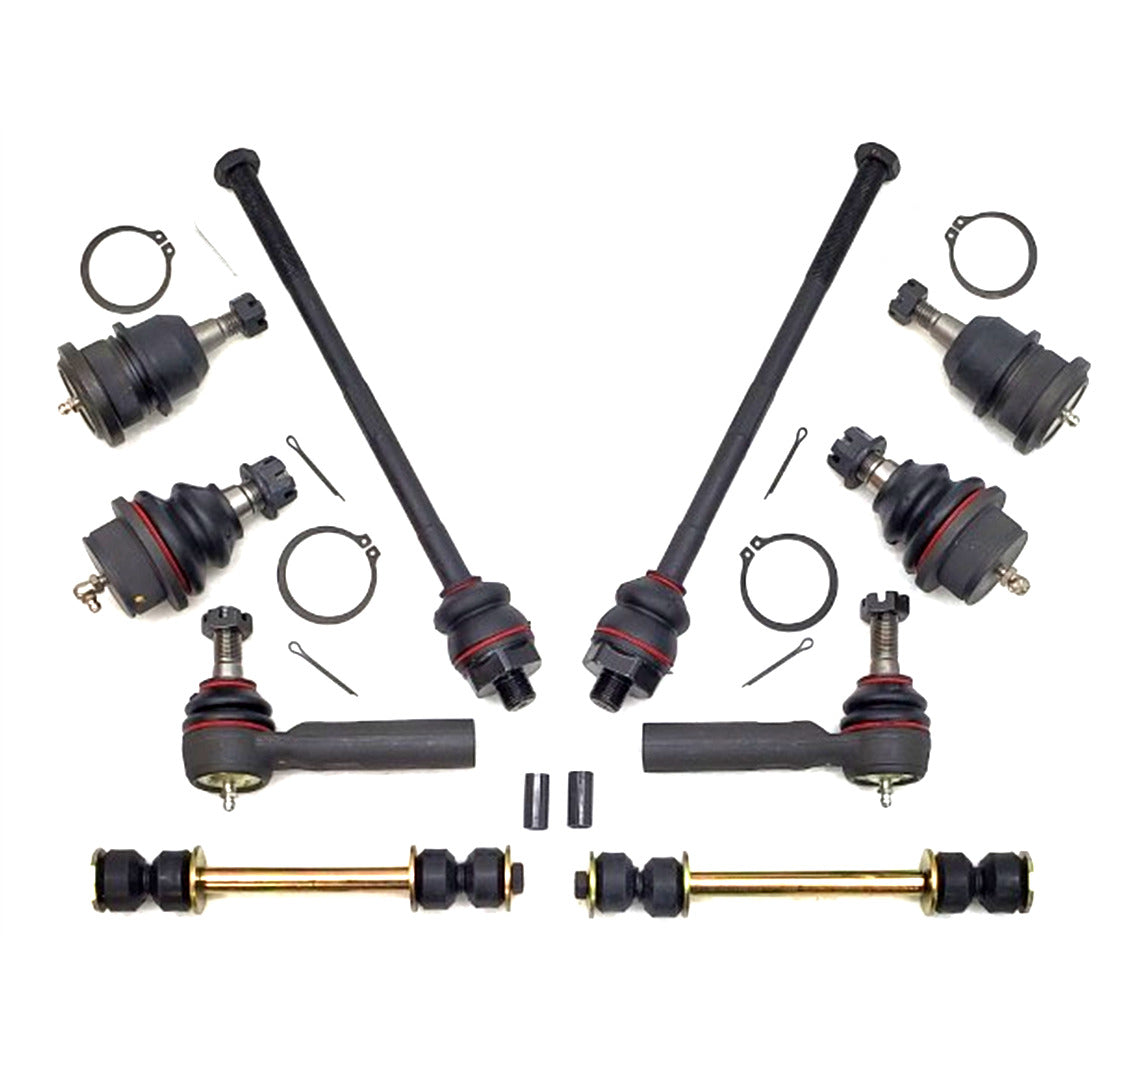 Lifetime Ball Joint Tie Rods Steering Kit for 1999-2007 Chevrolet, GMC, Cadillac 2WD, 4x4